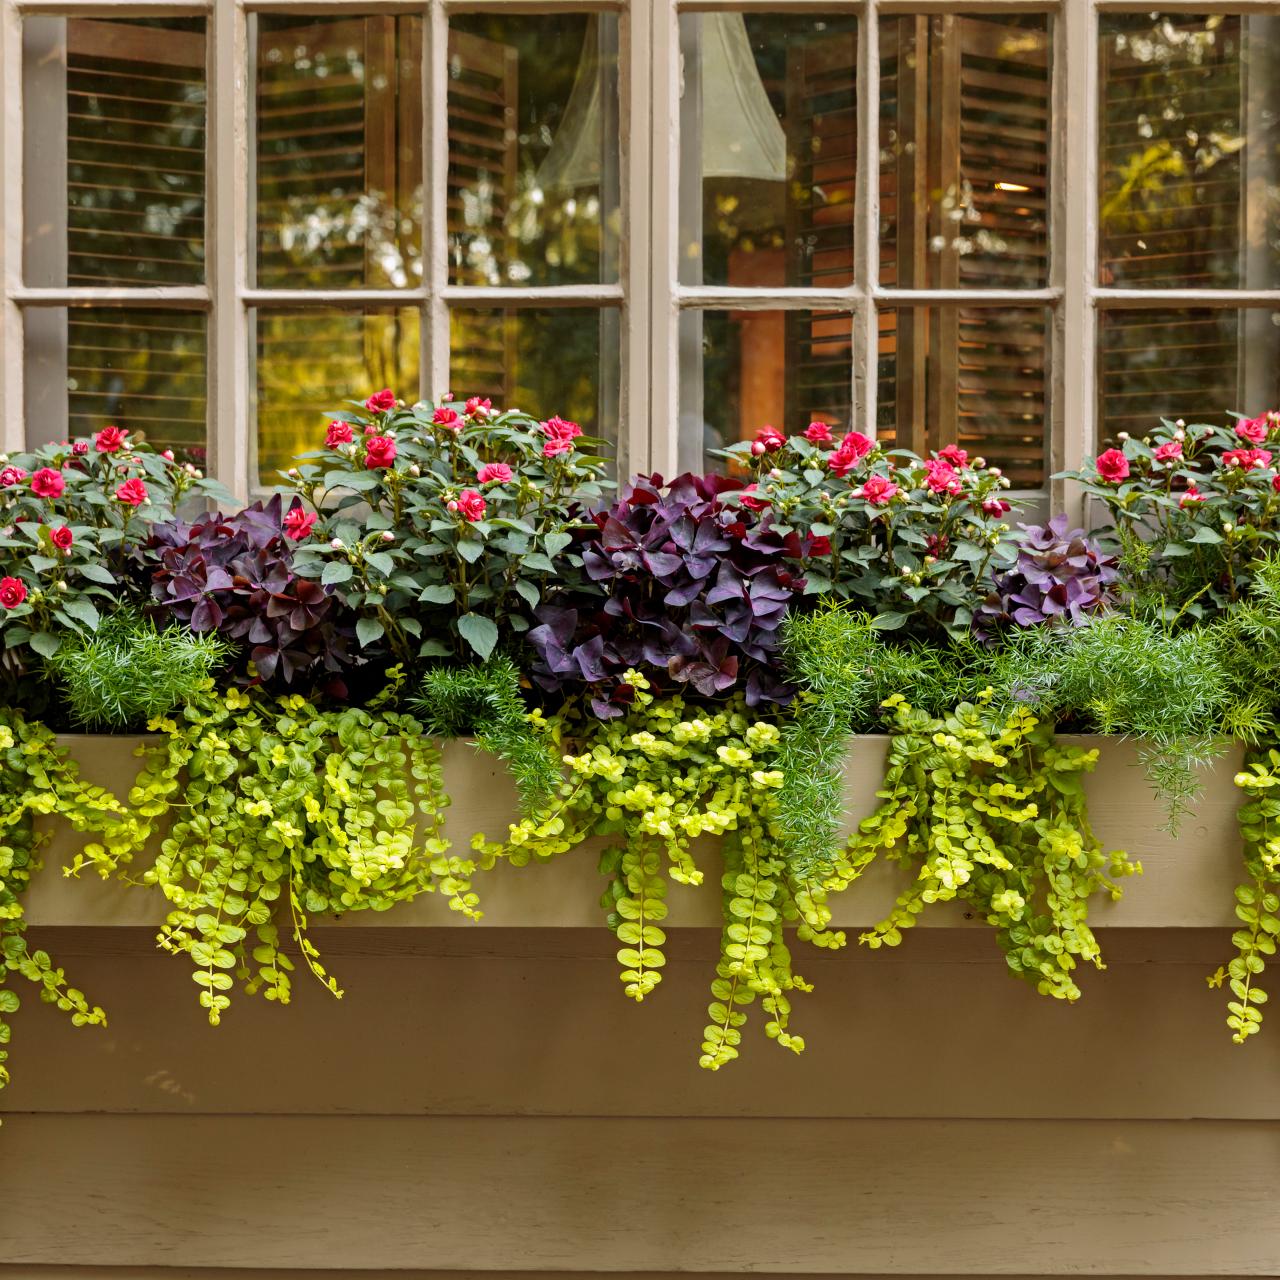 How to Plant and Care for Hanging Flower Bags